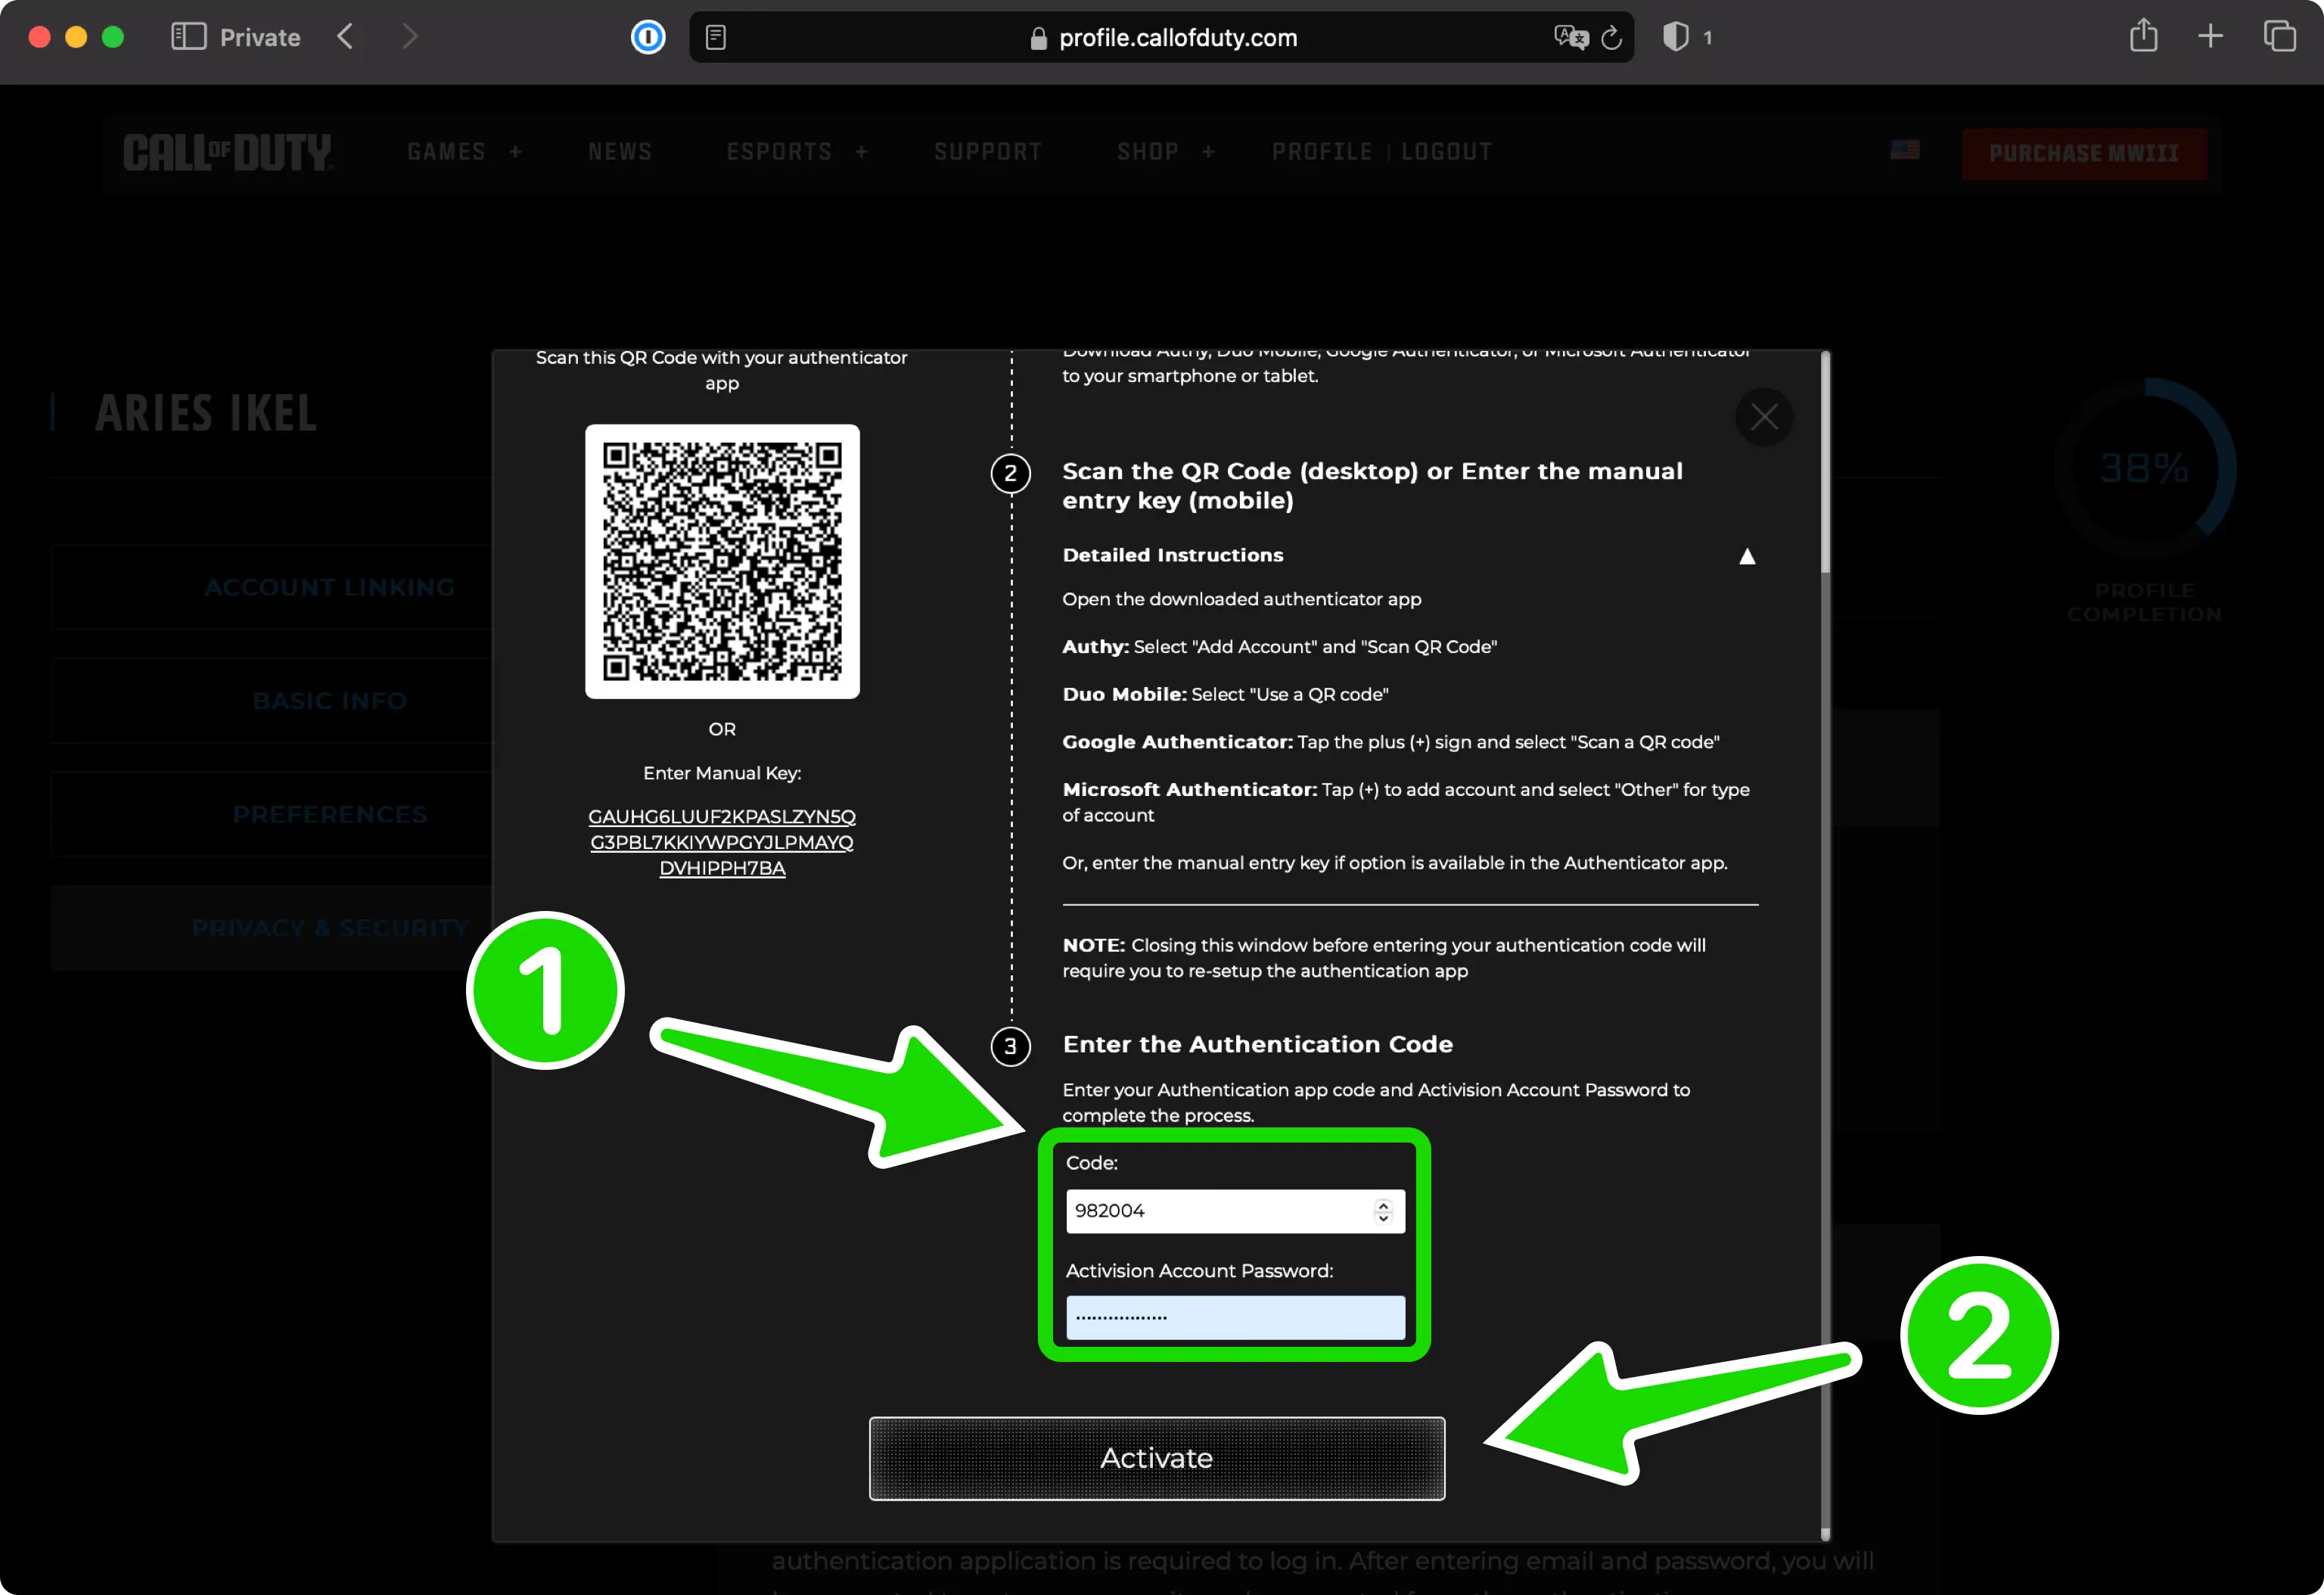 Confirm and Activate Authenticator App